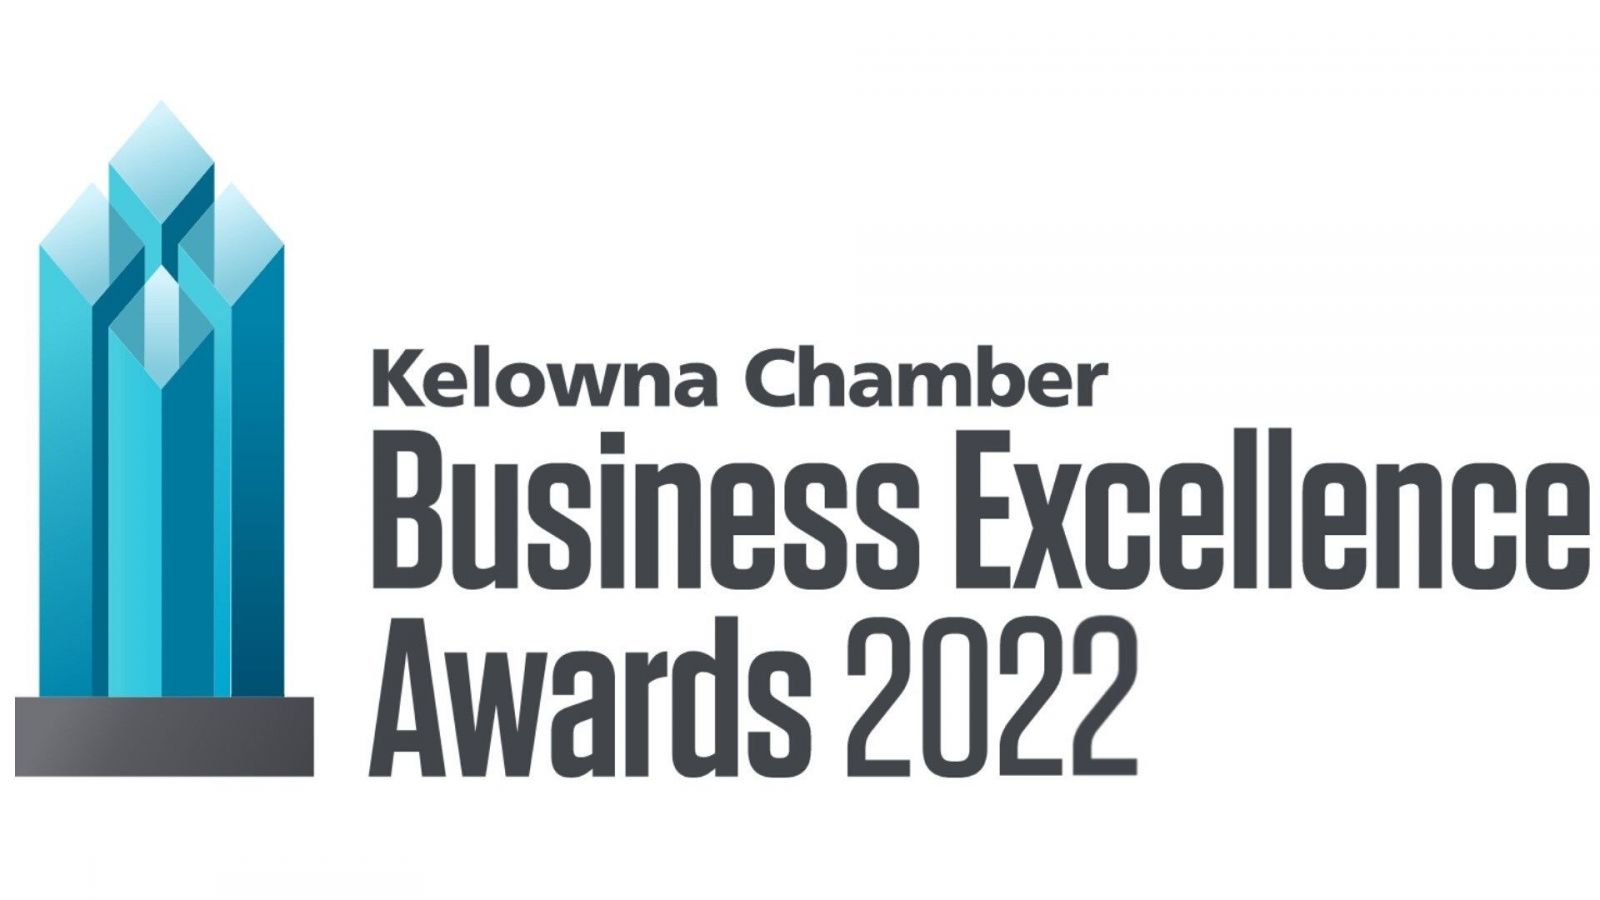 business excellence awards kelowna